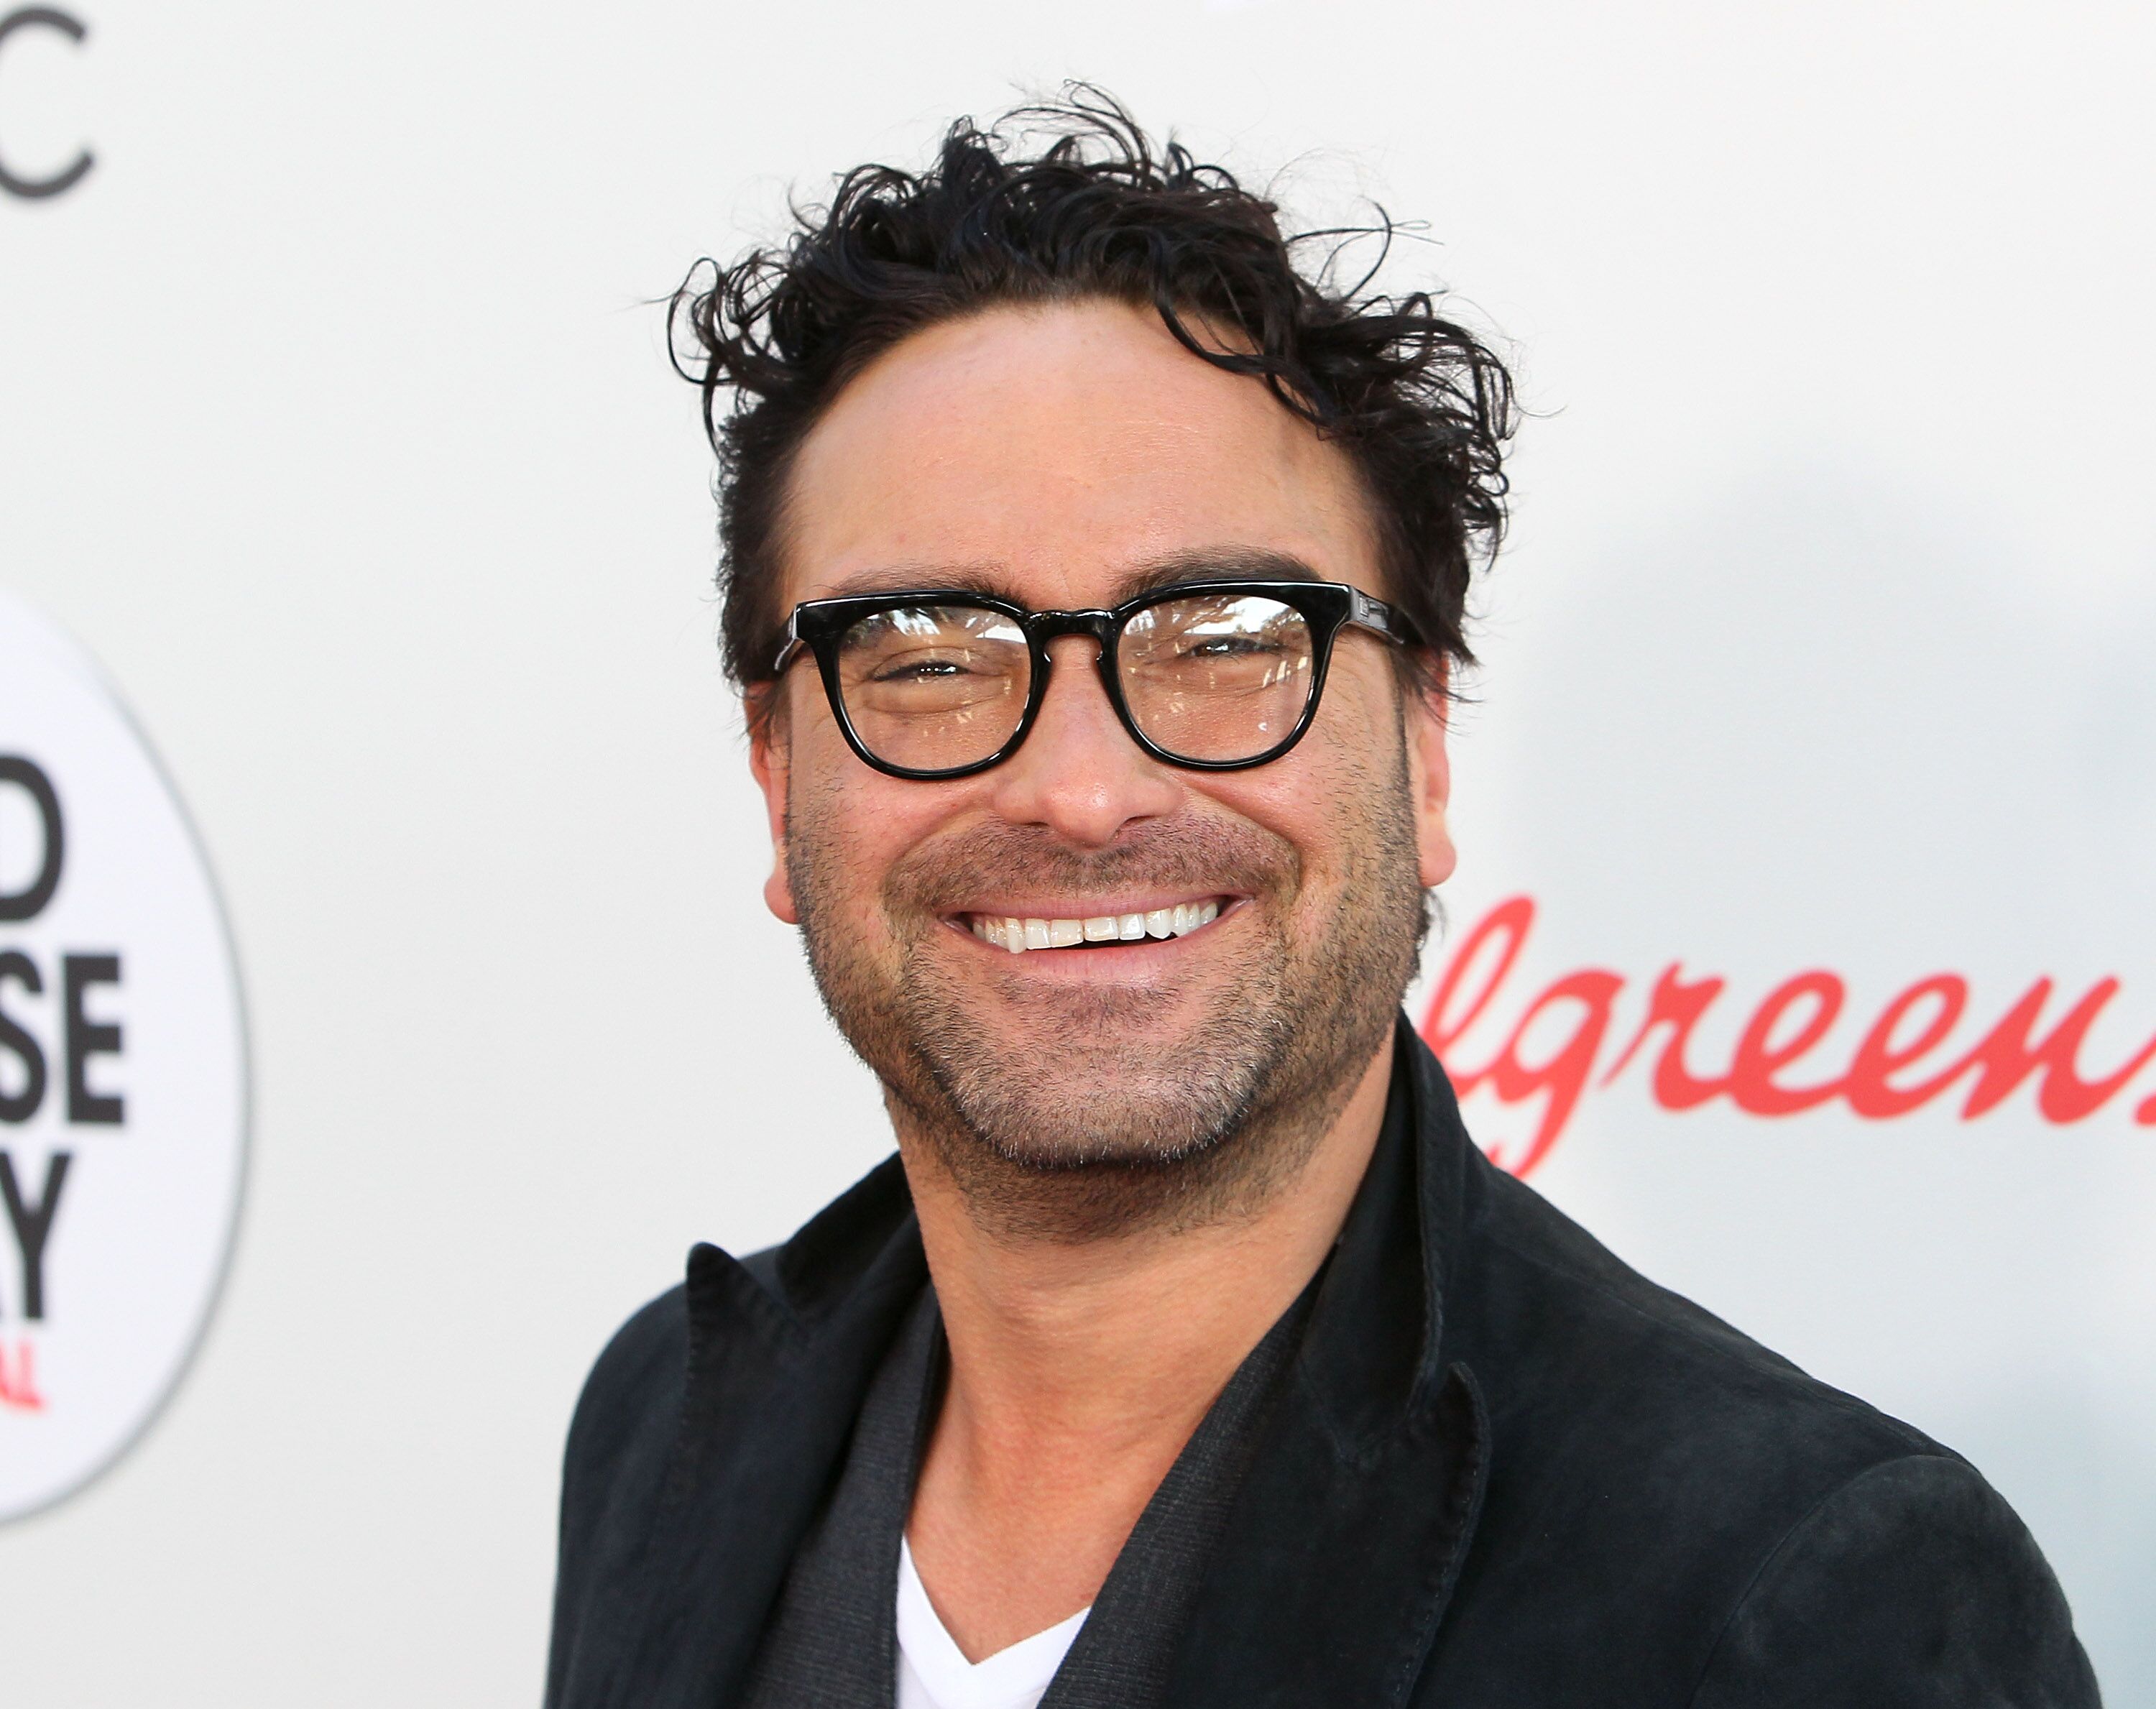 Johnny Galecki attends the Red Nose Day Special on NBC at the Alfred Hitchcock Theater at Alfred Hitchcock Theater at Universal Studios on May 26, 2016 in Universal City, California. | Source: Getty Images